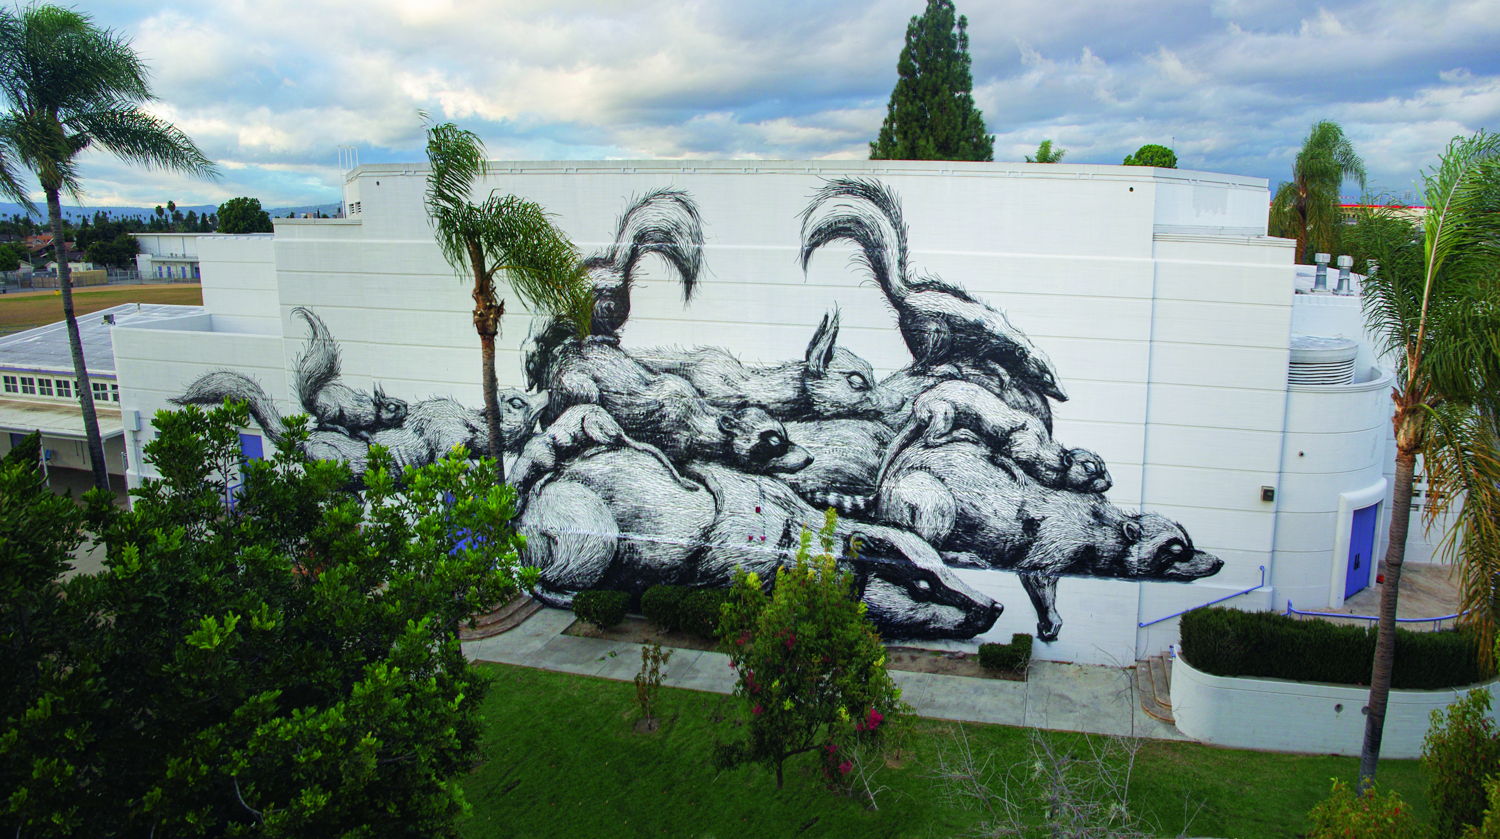 ROA-Los Angeles - Manual Arts High School in South Central - Courtesy of the Artist